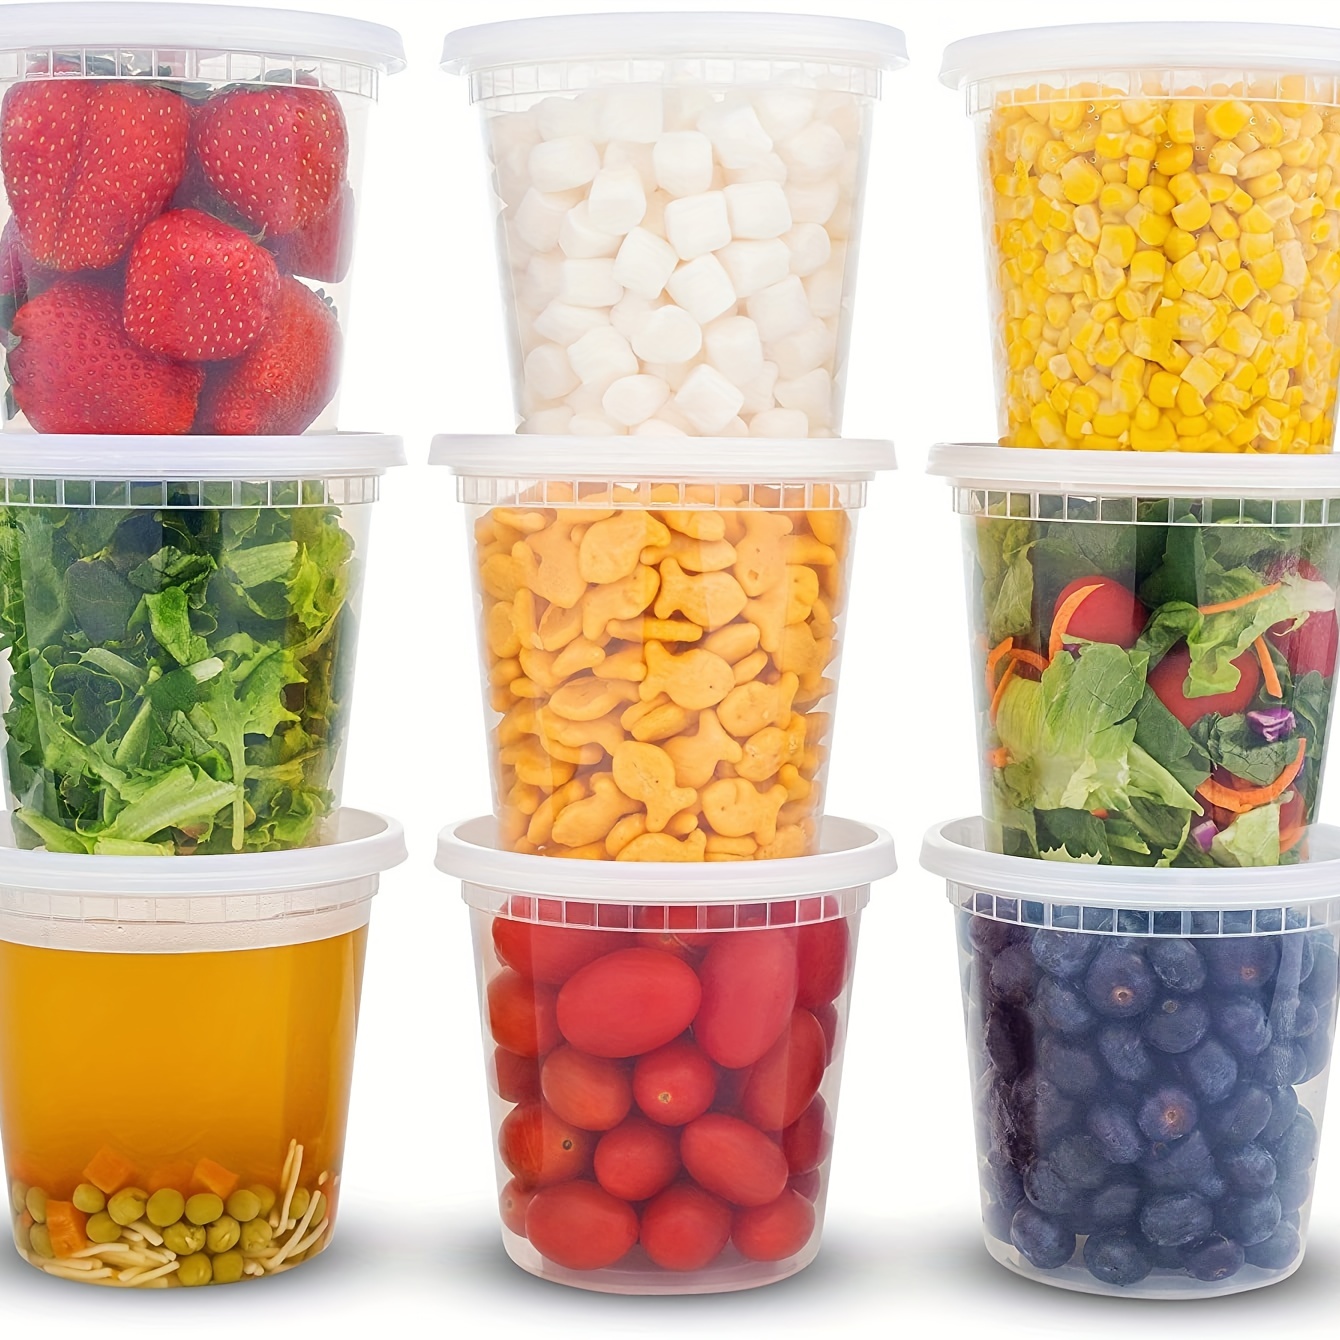 12-pack 8oz/250ml reuseable small plastic freezer storage container jars  with screw lid for food kids baby lunch snacks slime cup, Sturdy  Plastic, BPA Free, Freezer & Dishwasher Safe